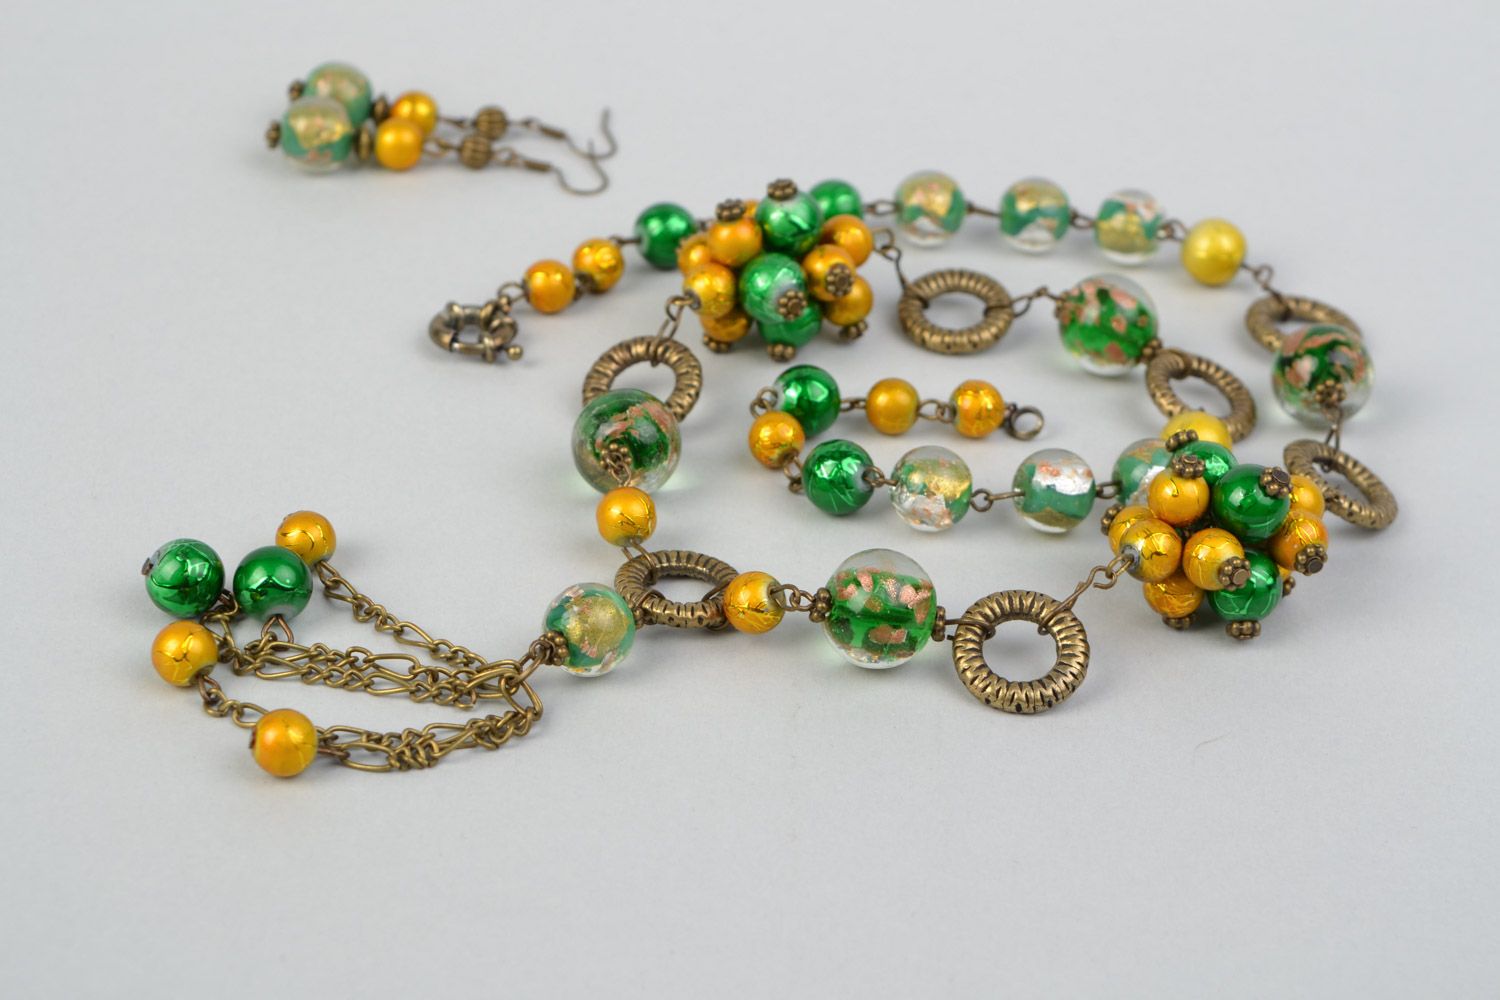 Handmade jewelry set with glass and ceramic beads necklace and earrings photo 1